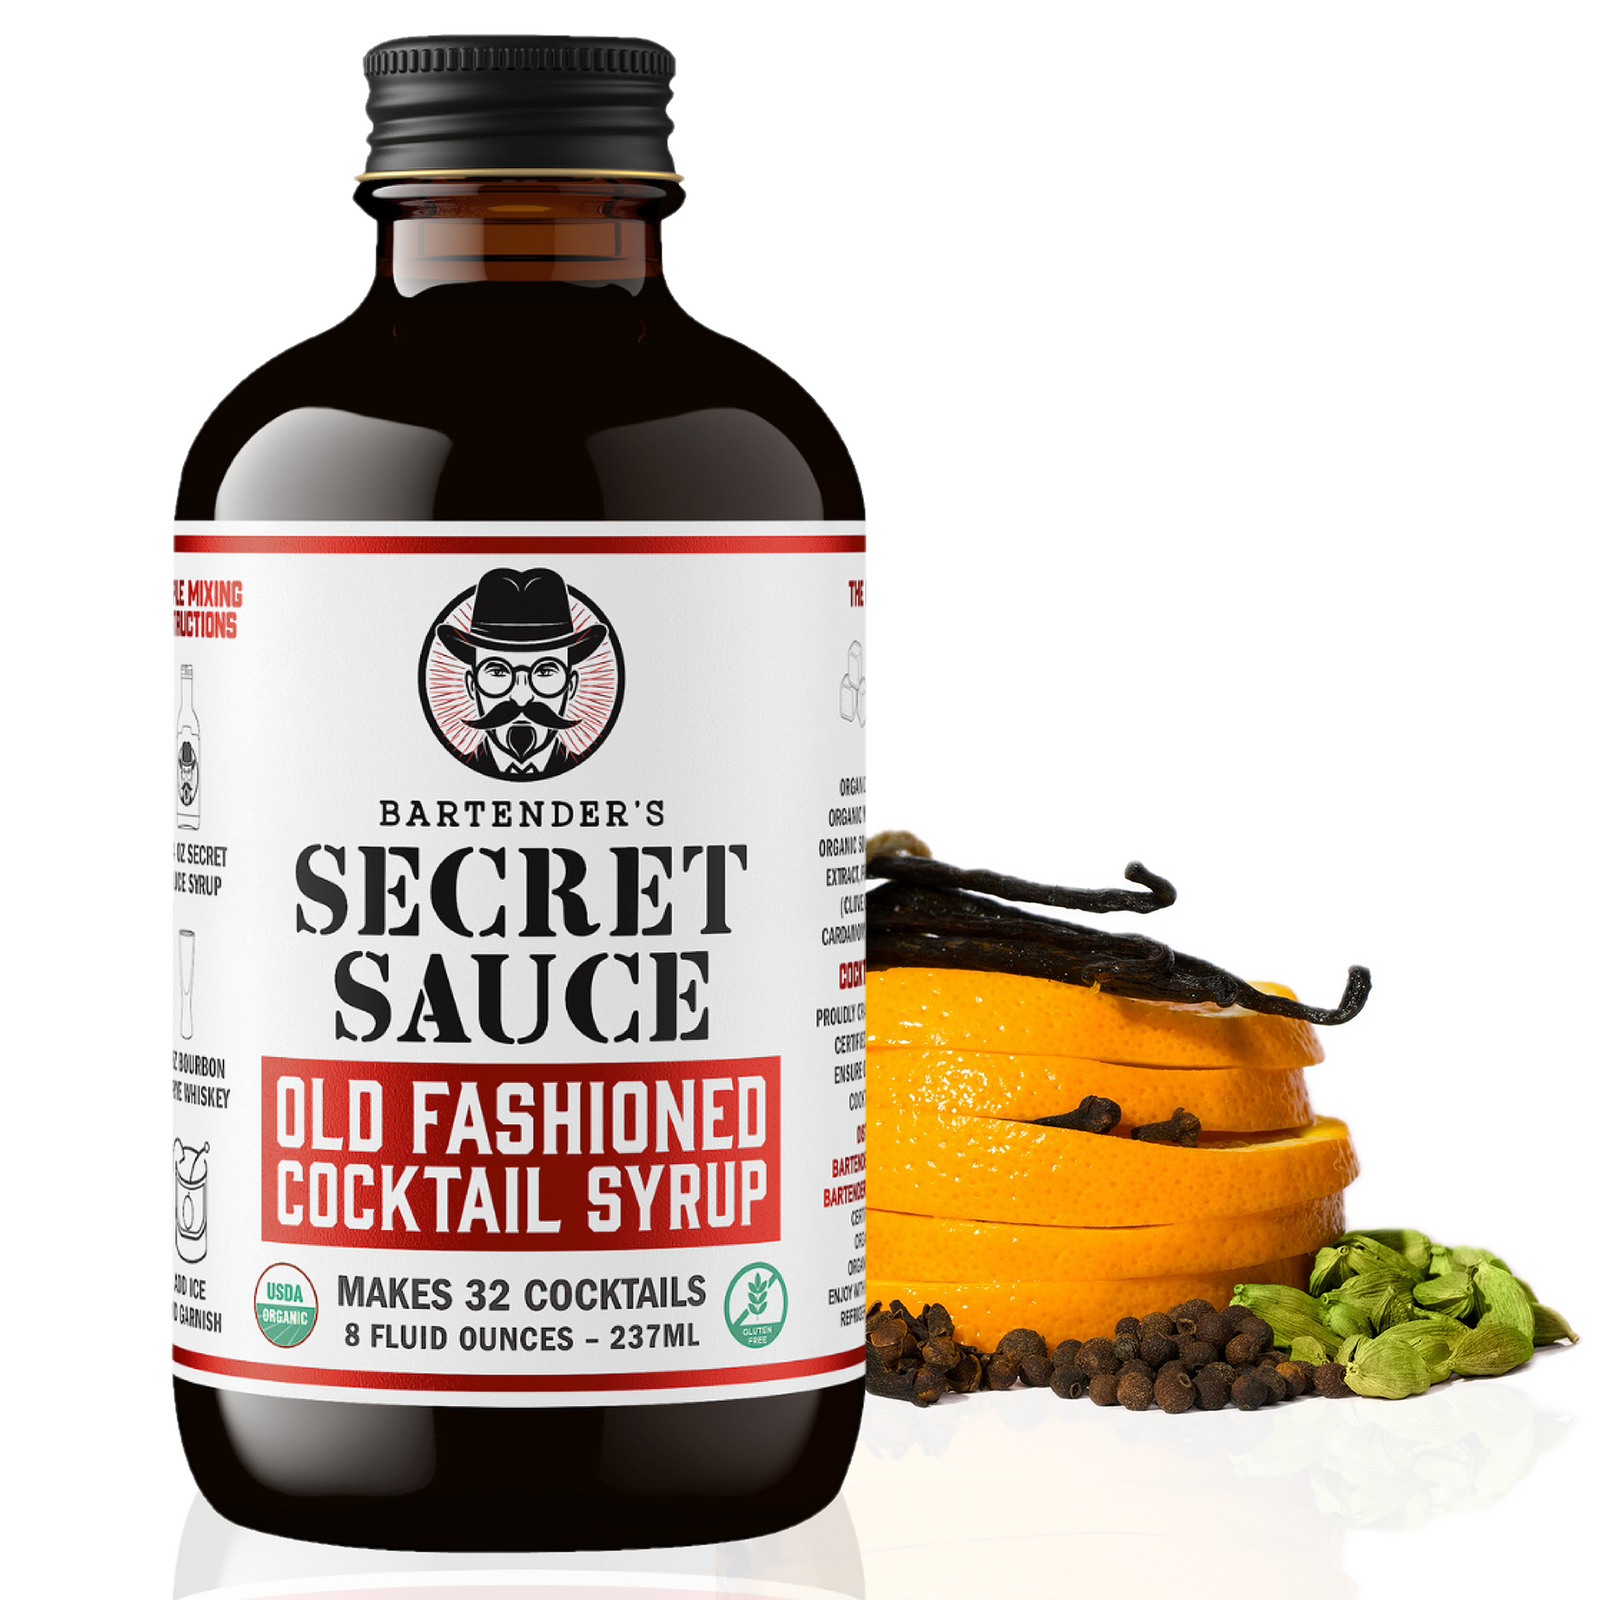 Bartender's Secret Sauce - Old Fashioned Cocktail Syrup - 8 Ounce